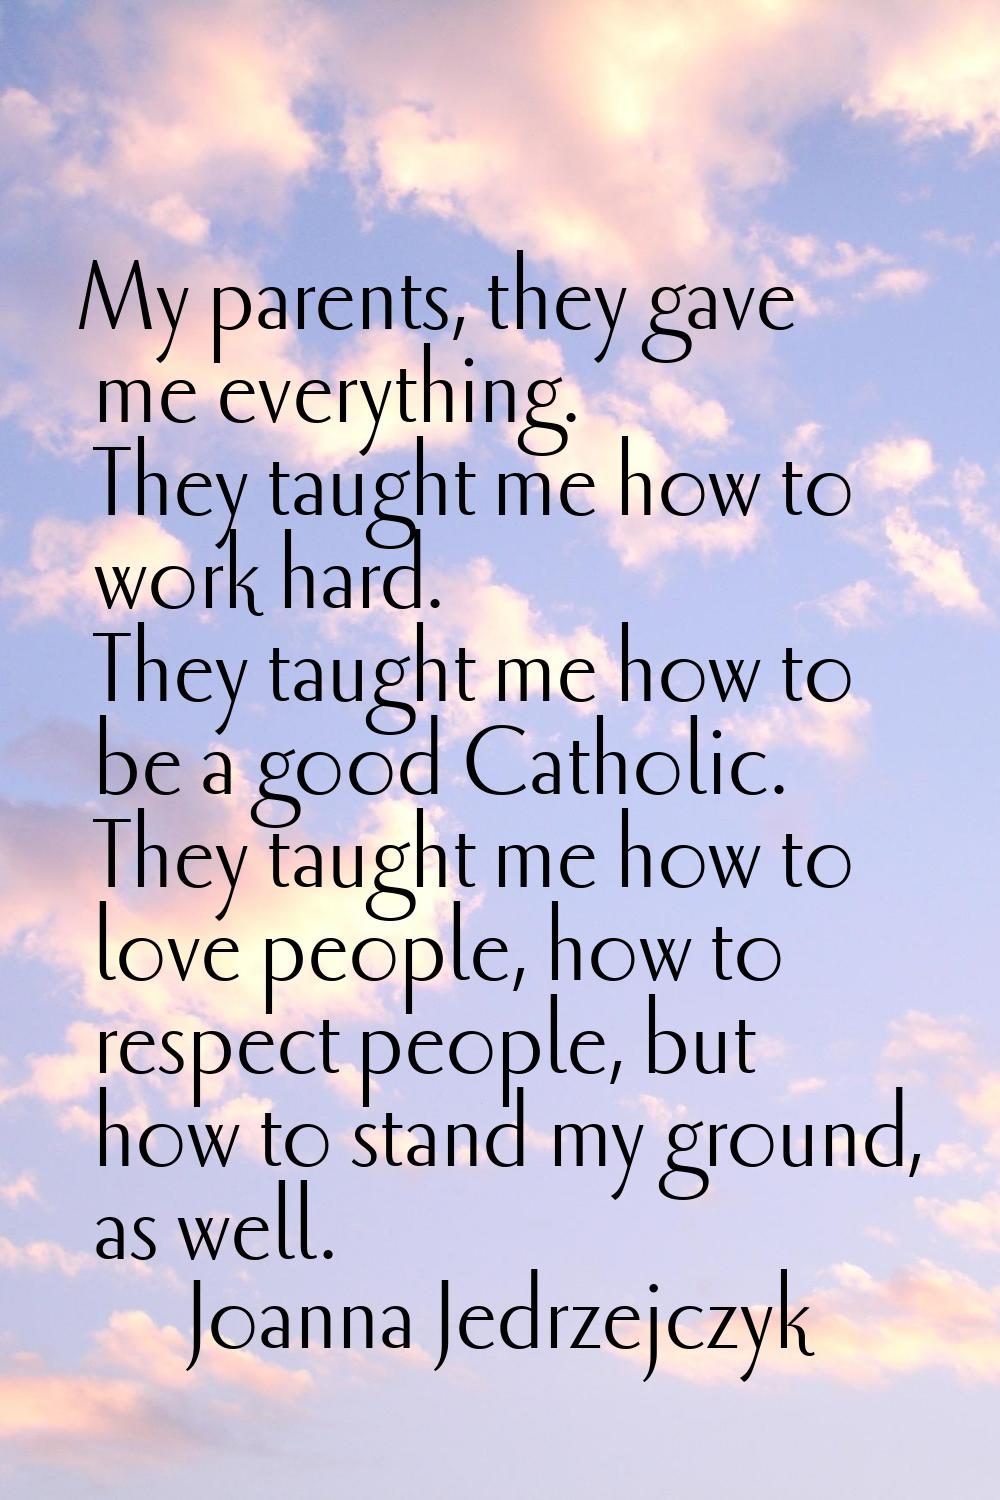 My parents, they gave me everything. They taught me how to work hard. They taught me how to be a go